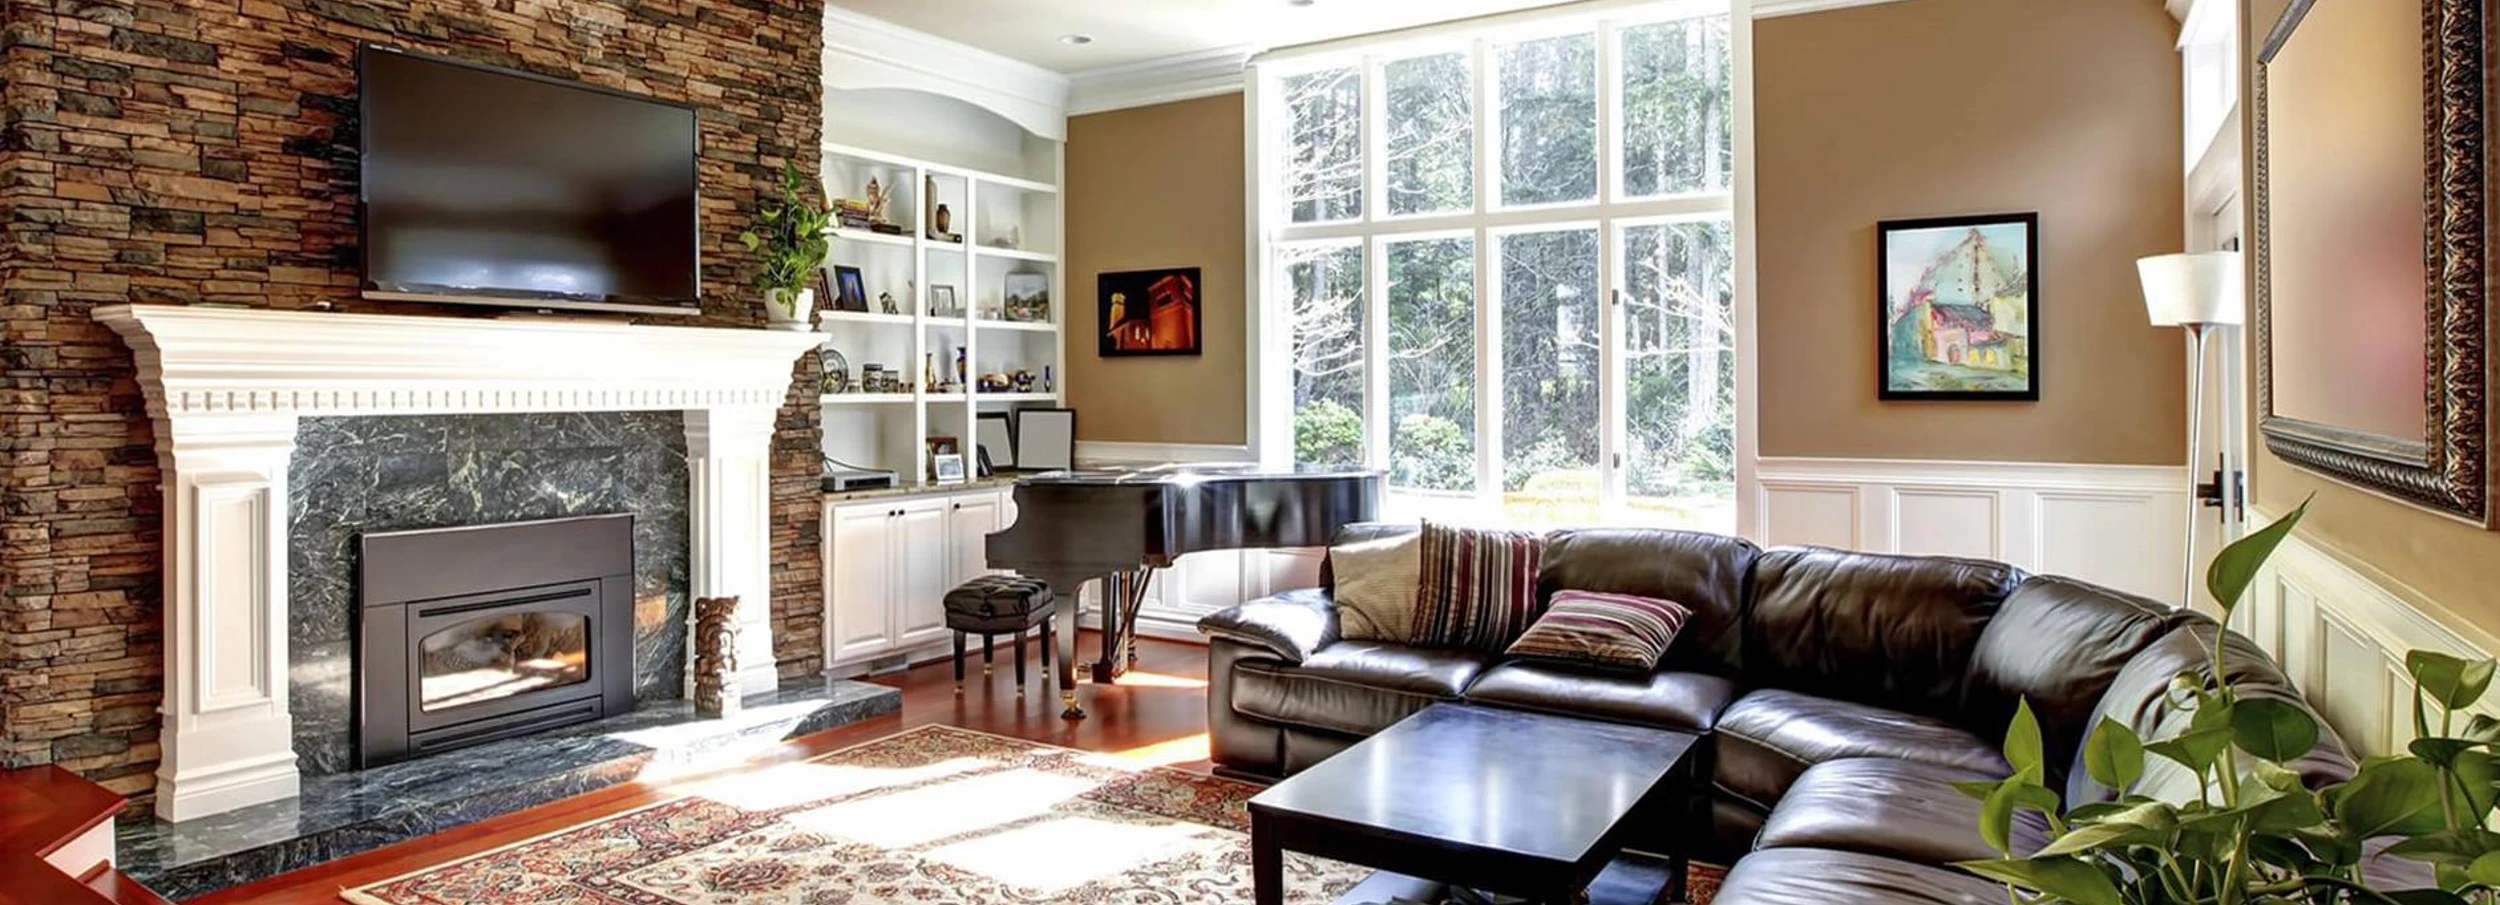 Sunny living room with brown leather sectional sofa and fireplace.